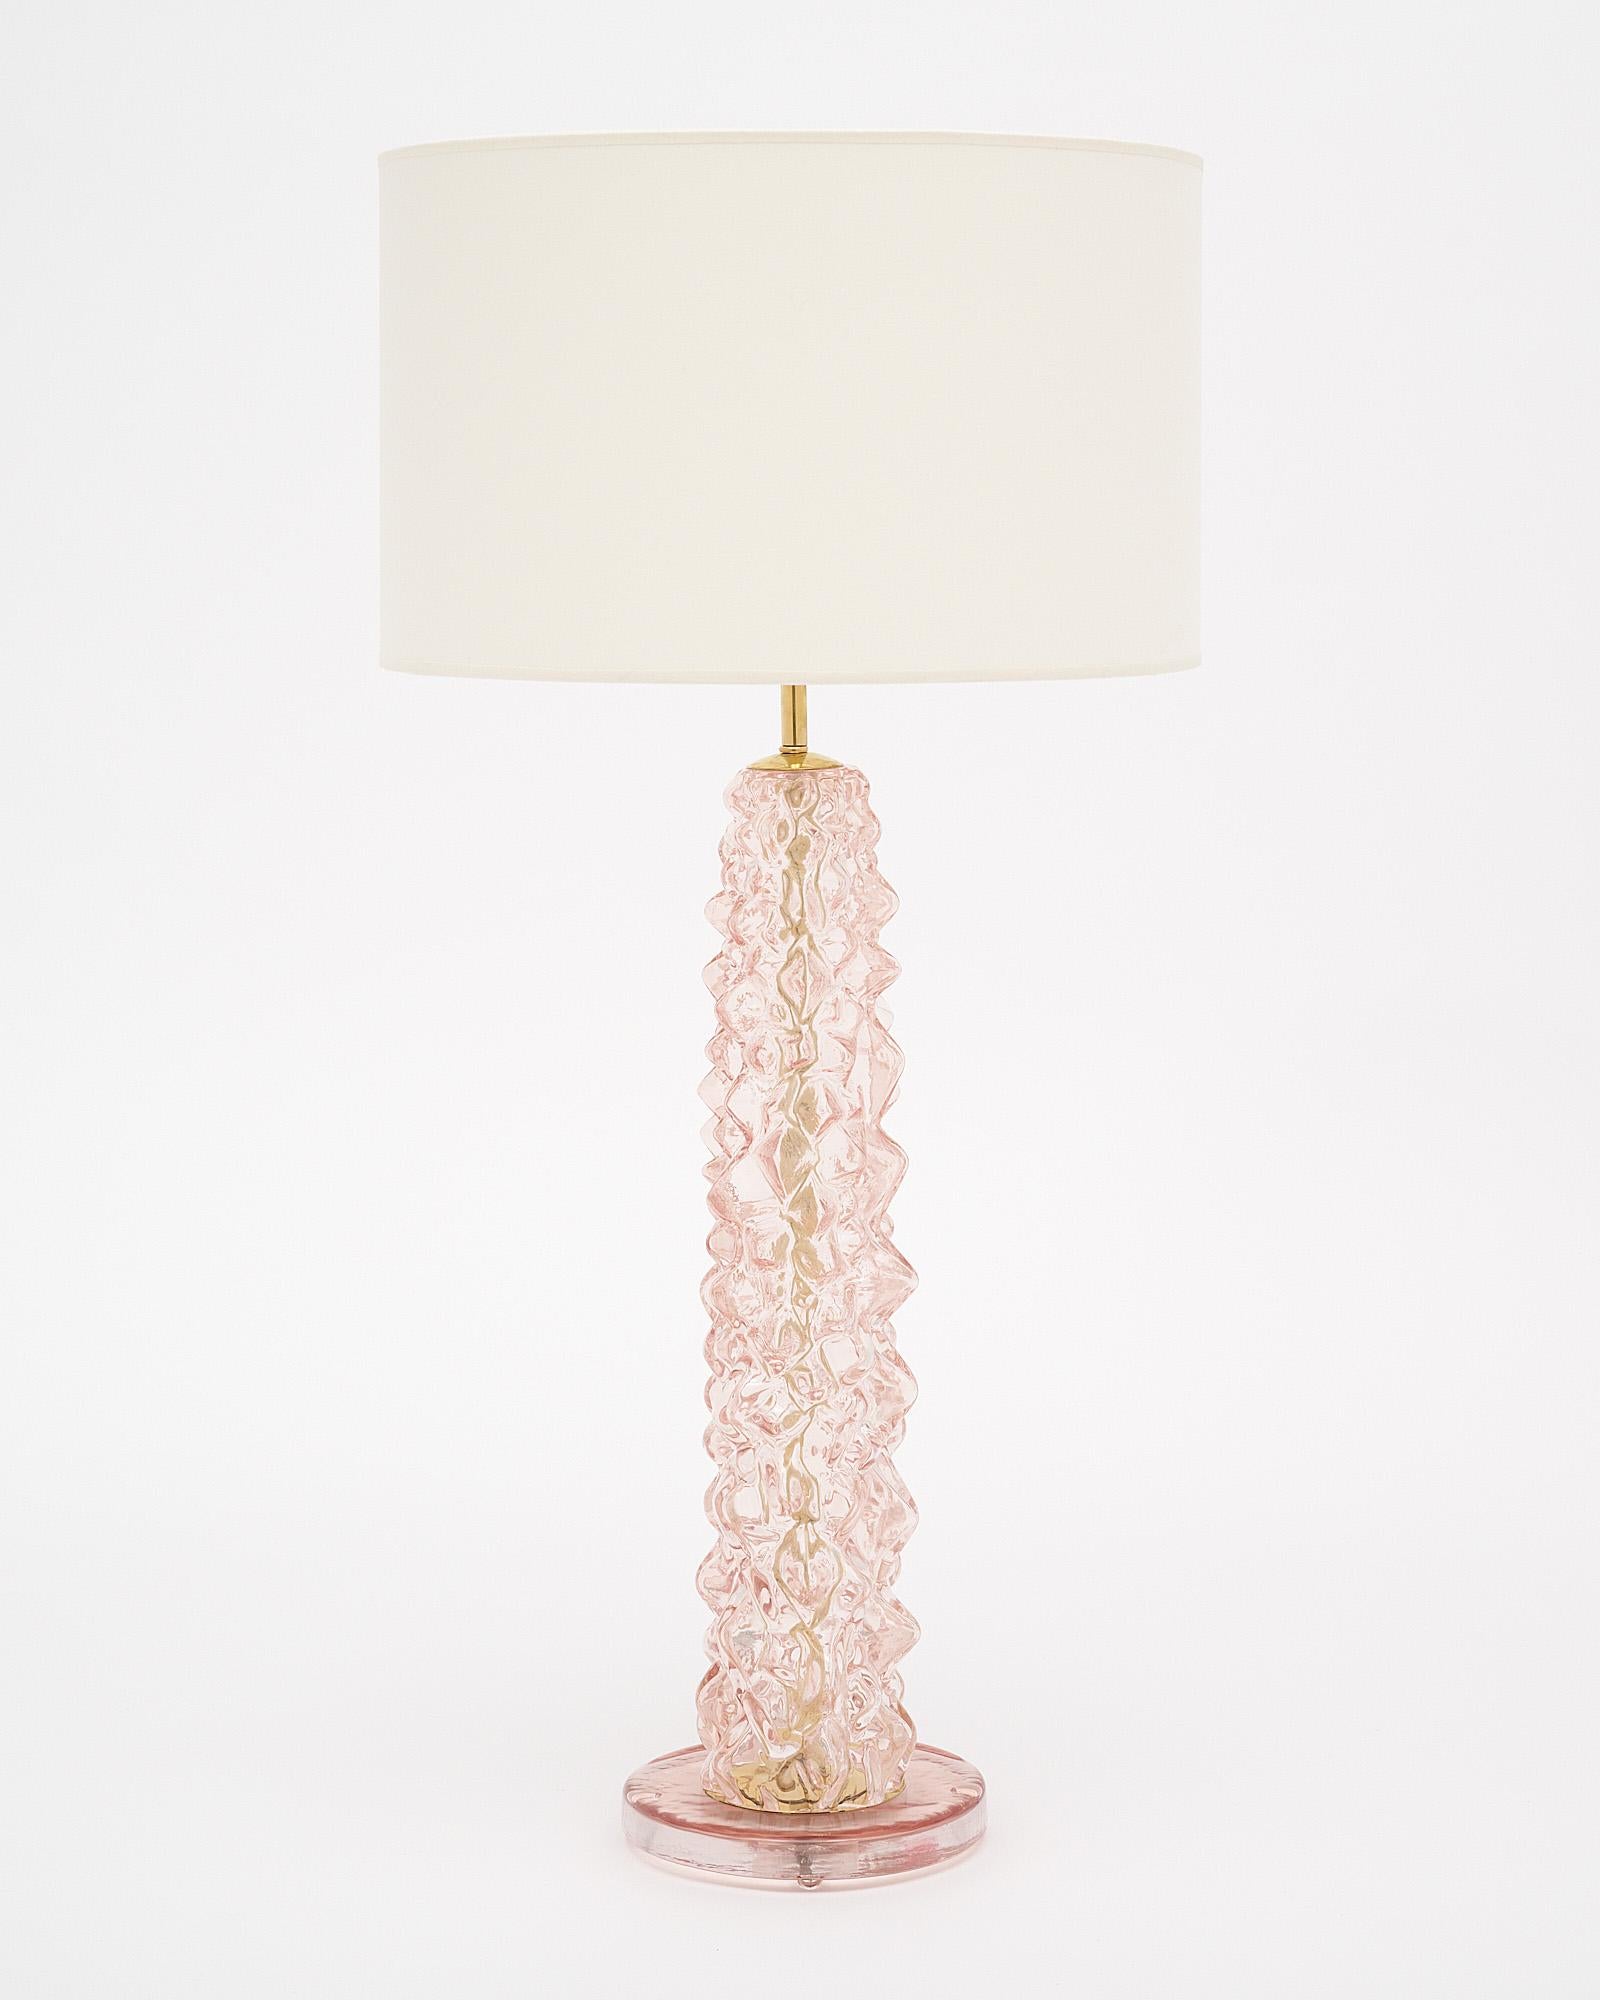 Pair of lamps made of hand-blown Murano glass in a lovely pink tone. This pair has been crafted in the “rostrate” technique in the manner of iconic Murano glass powerhouse “Barovier”, where the glass is pulled to mimic birds beaks. The glass is